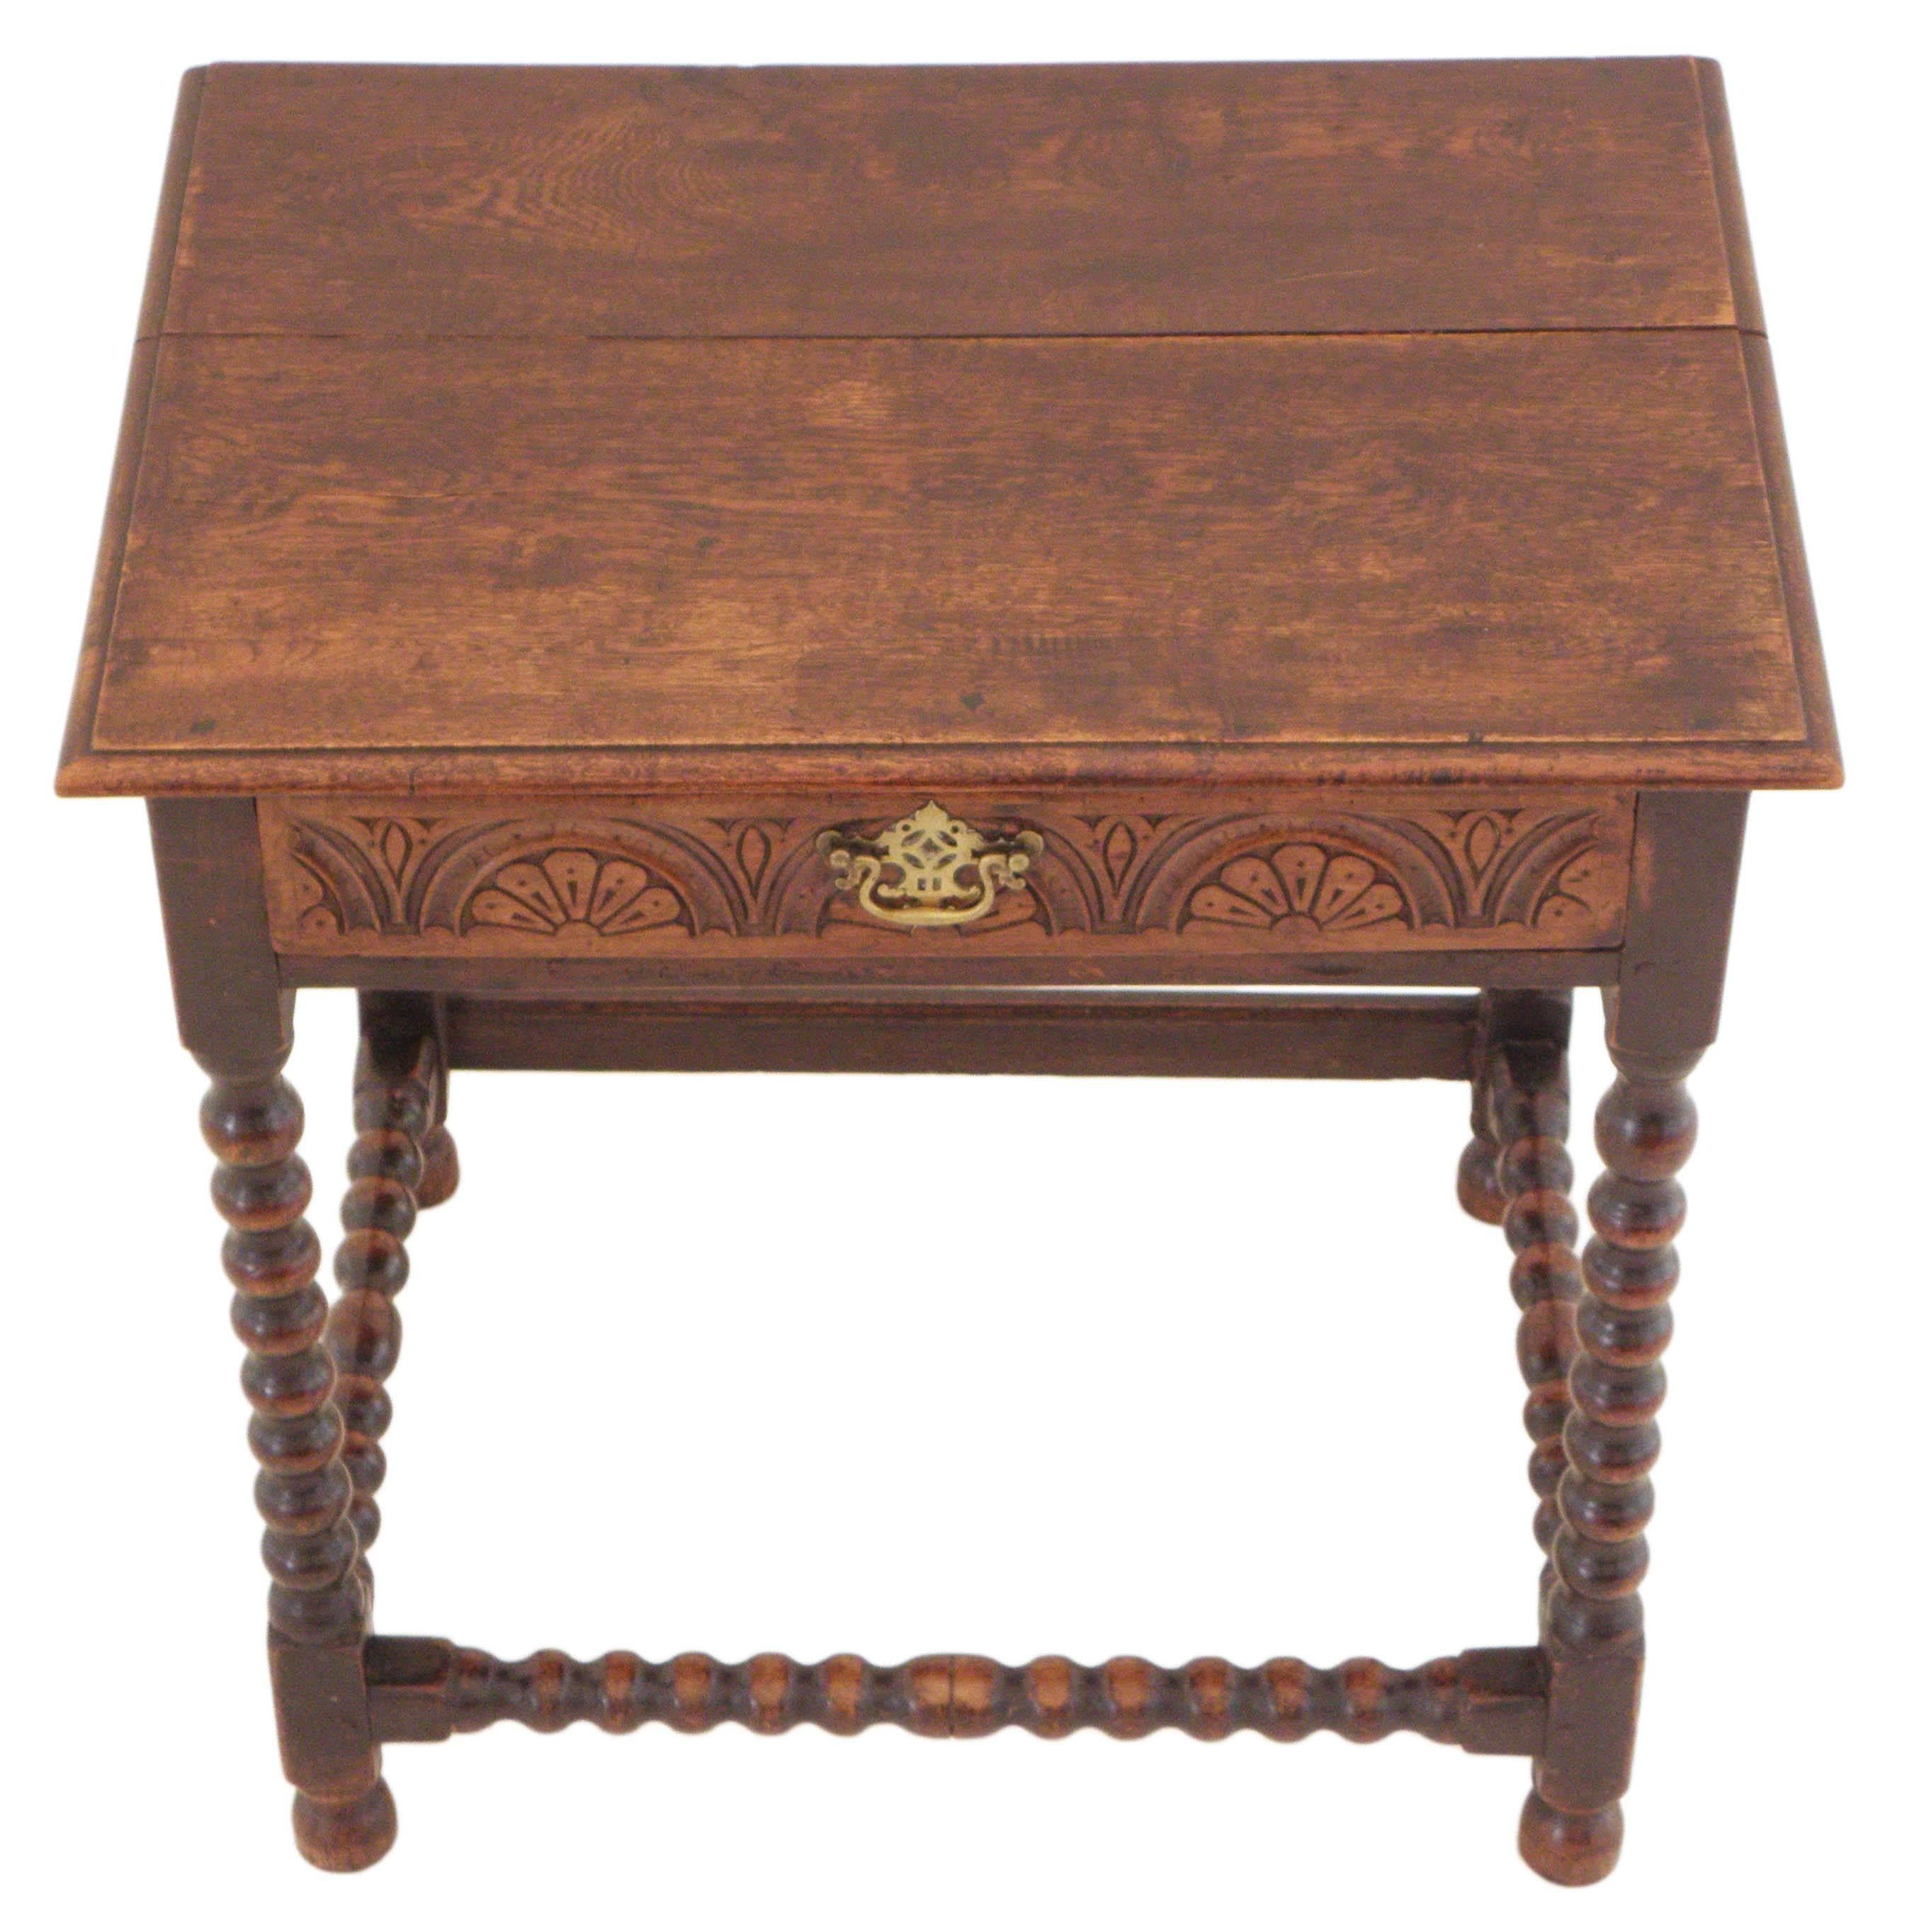 Antique Georgian 18th century origins (with later alteration) oak lowboy side occasional table.

This is charming lowboy table with the most wonderful age, colour and patina (note the height, which is higher than some, but lower than a writing